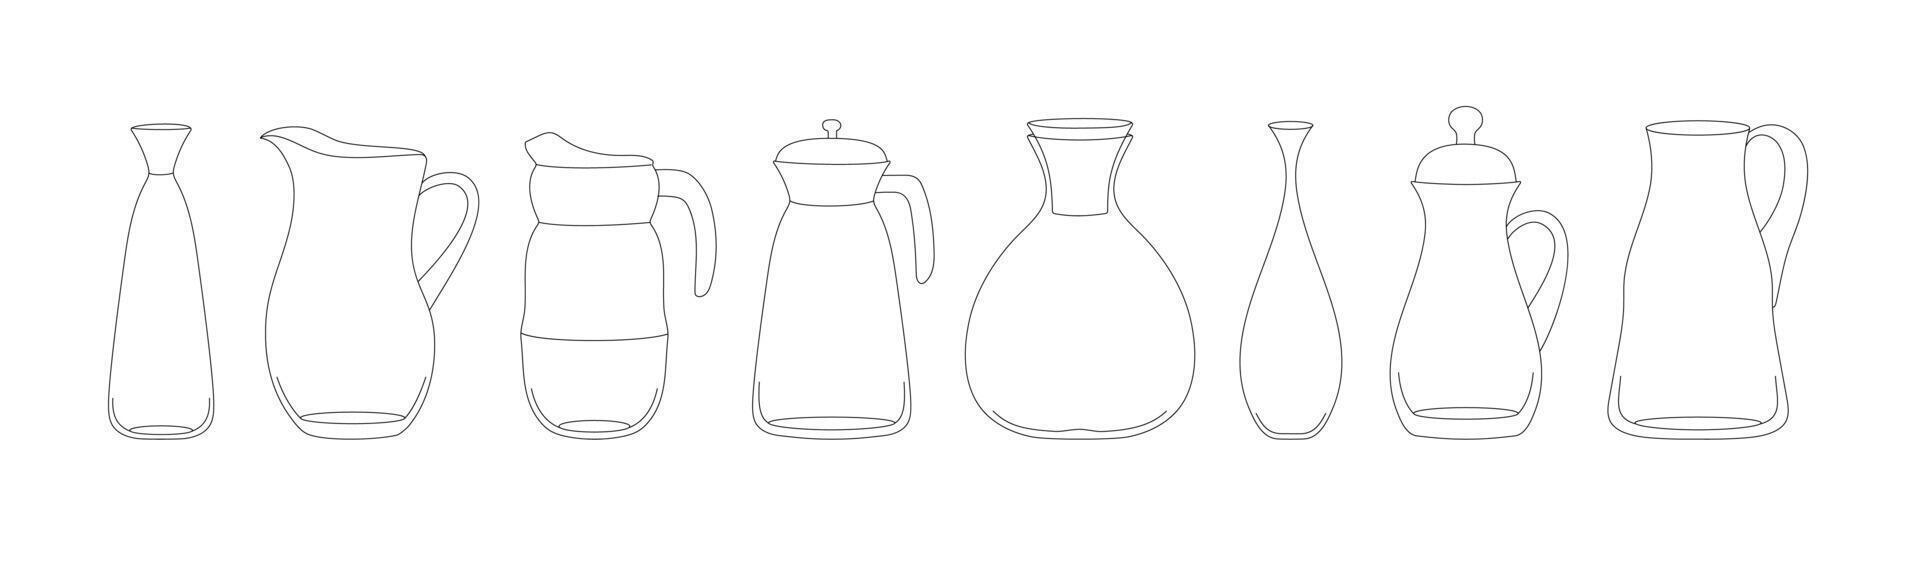 Line Drawing of a Set of Bottles vector